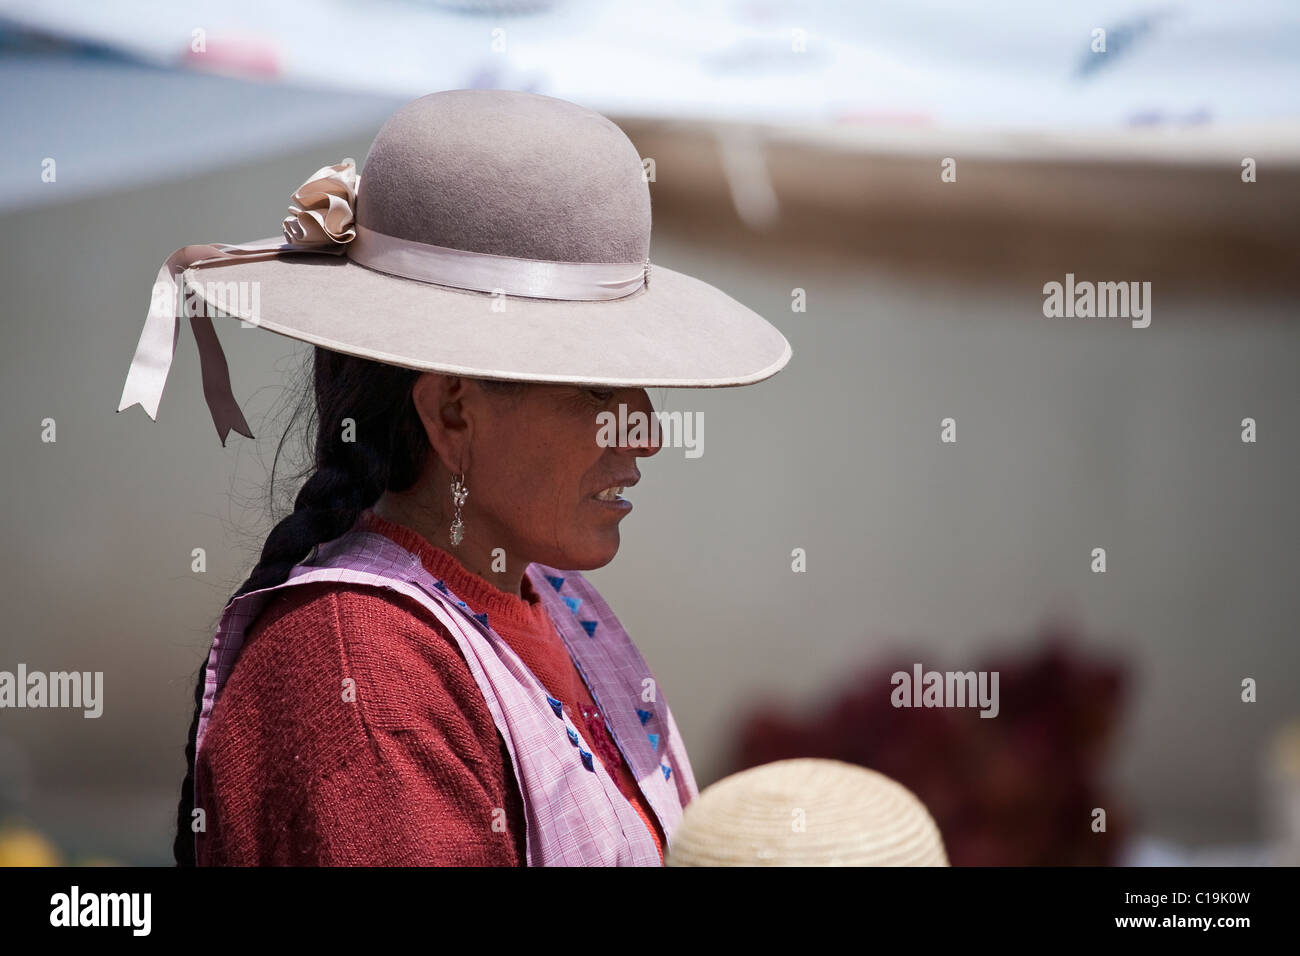 Bolivian Lady dressed in typical clothing with hat, Huari, Bolivia, South America. Stock Photo